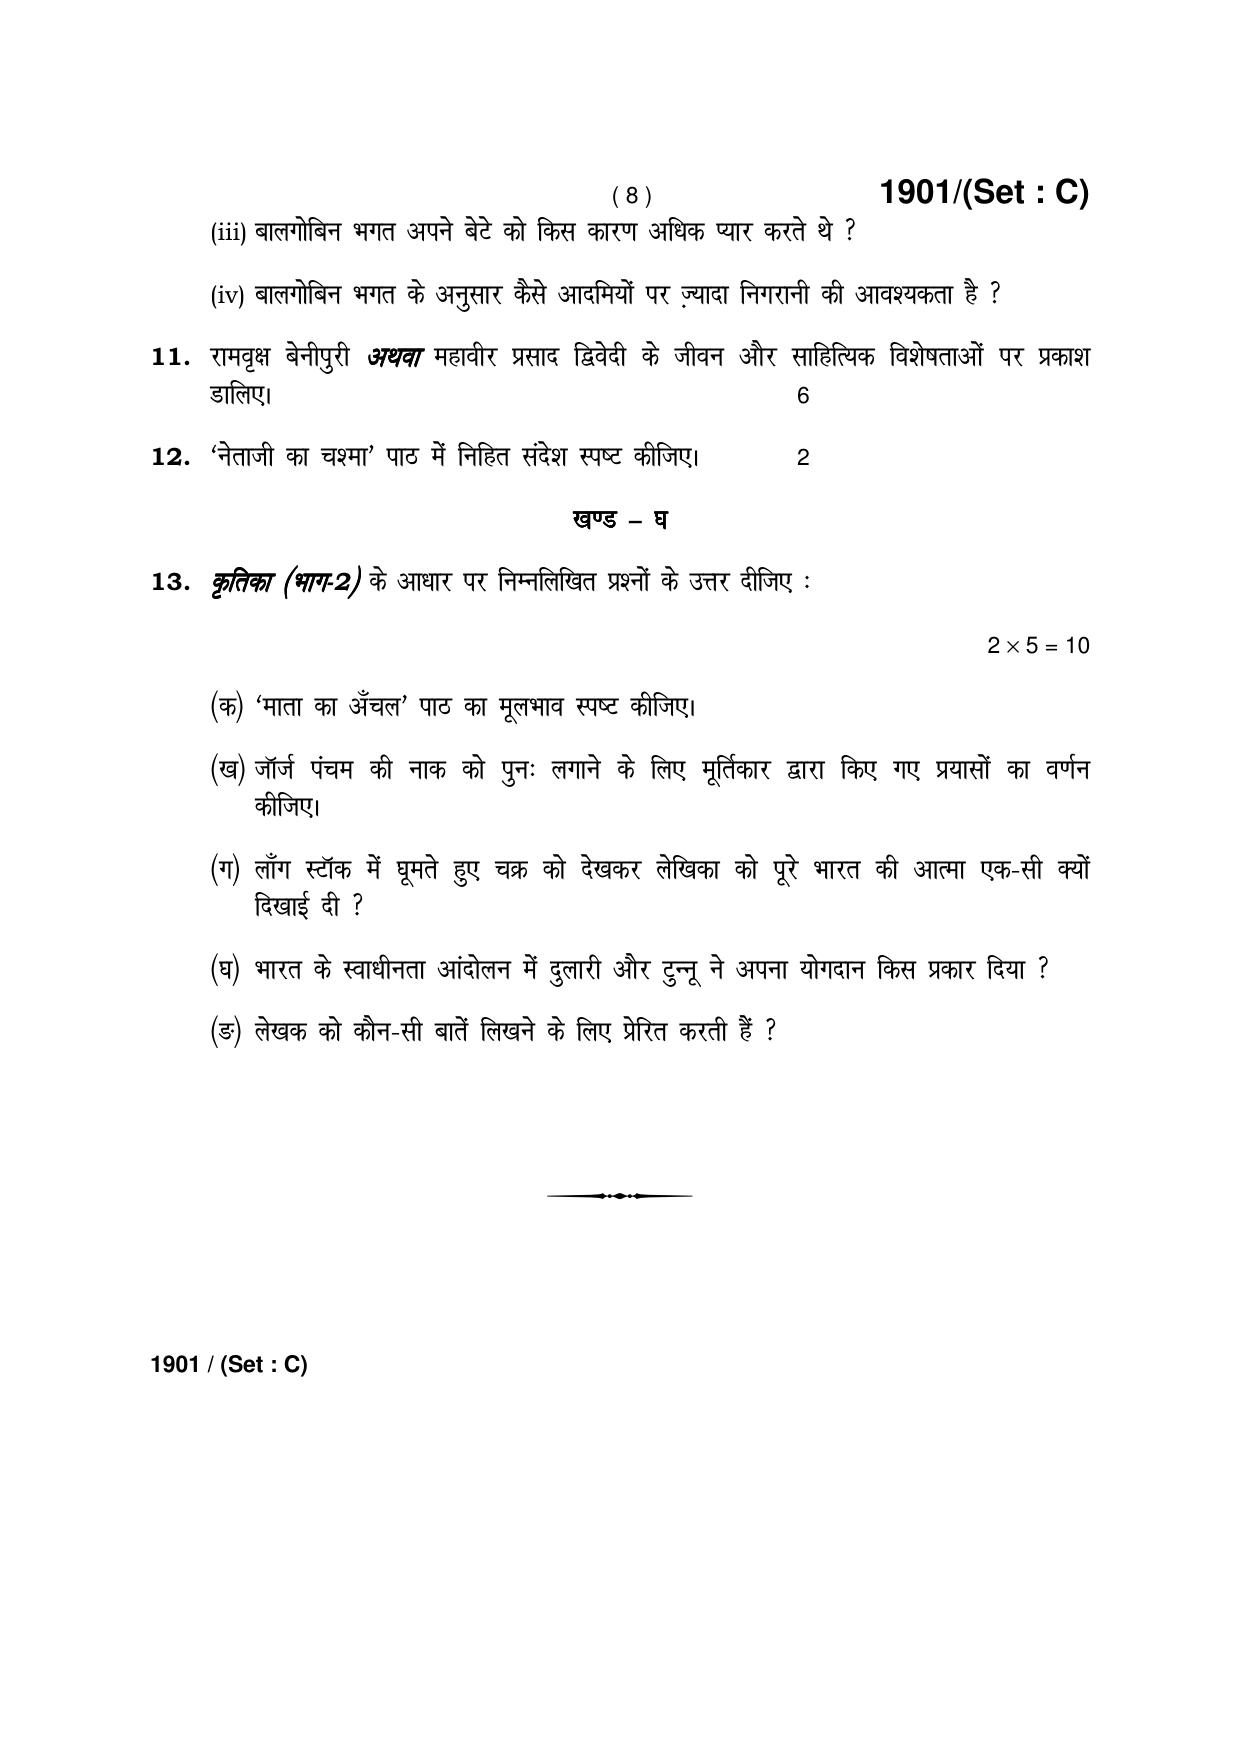 Haryana Board HBSE Class 10 Hindi -C 2017 Question Paper - Page 8